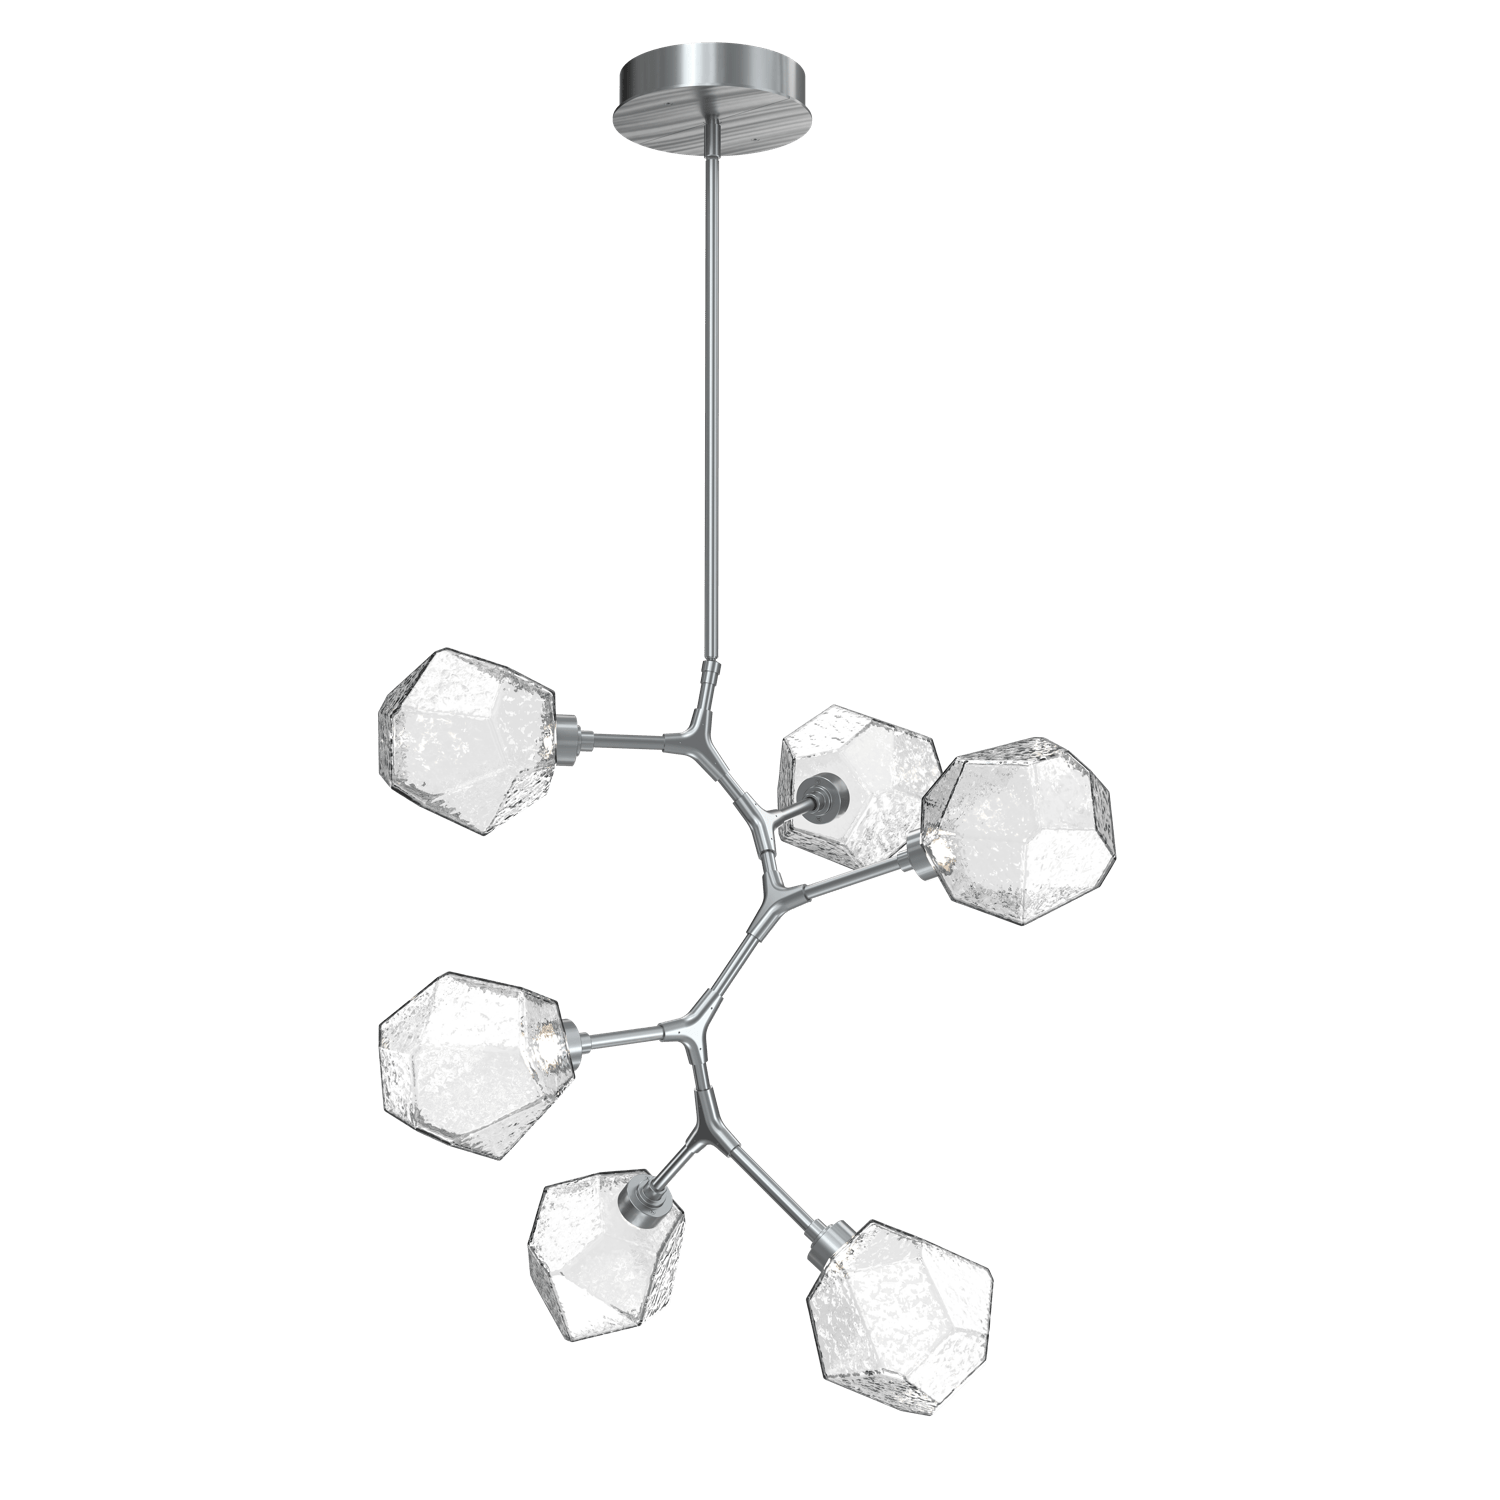 CHB0039-VA-SN-C-Hammerton-Studio-Gem-6-light-modern-vine-chandelier-with-satin-nickel-finish-and-clear-blown-glass-shades-and-LED-lamping